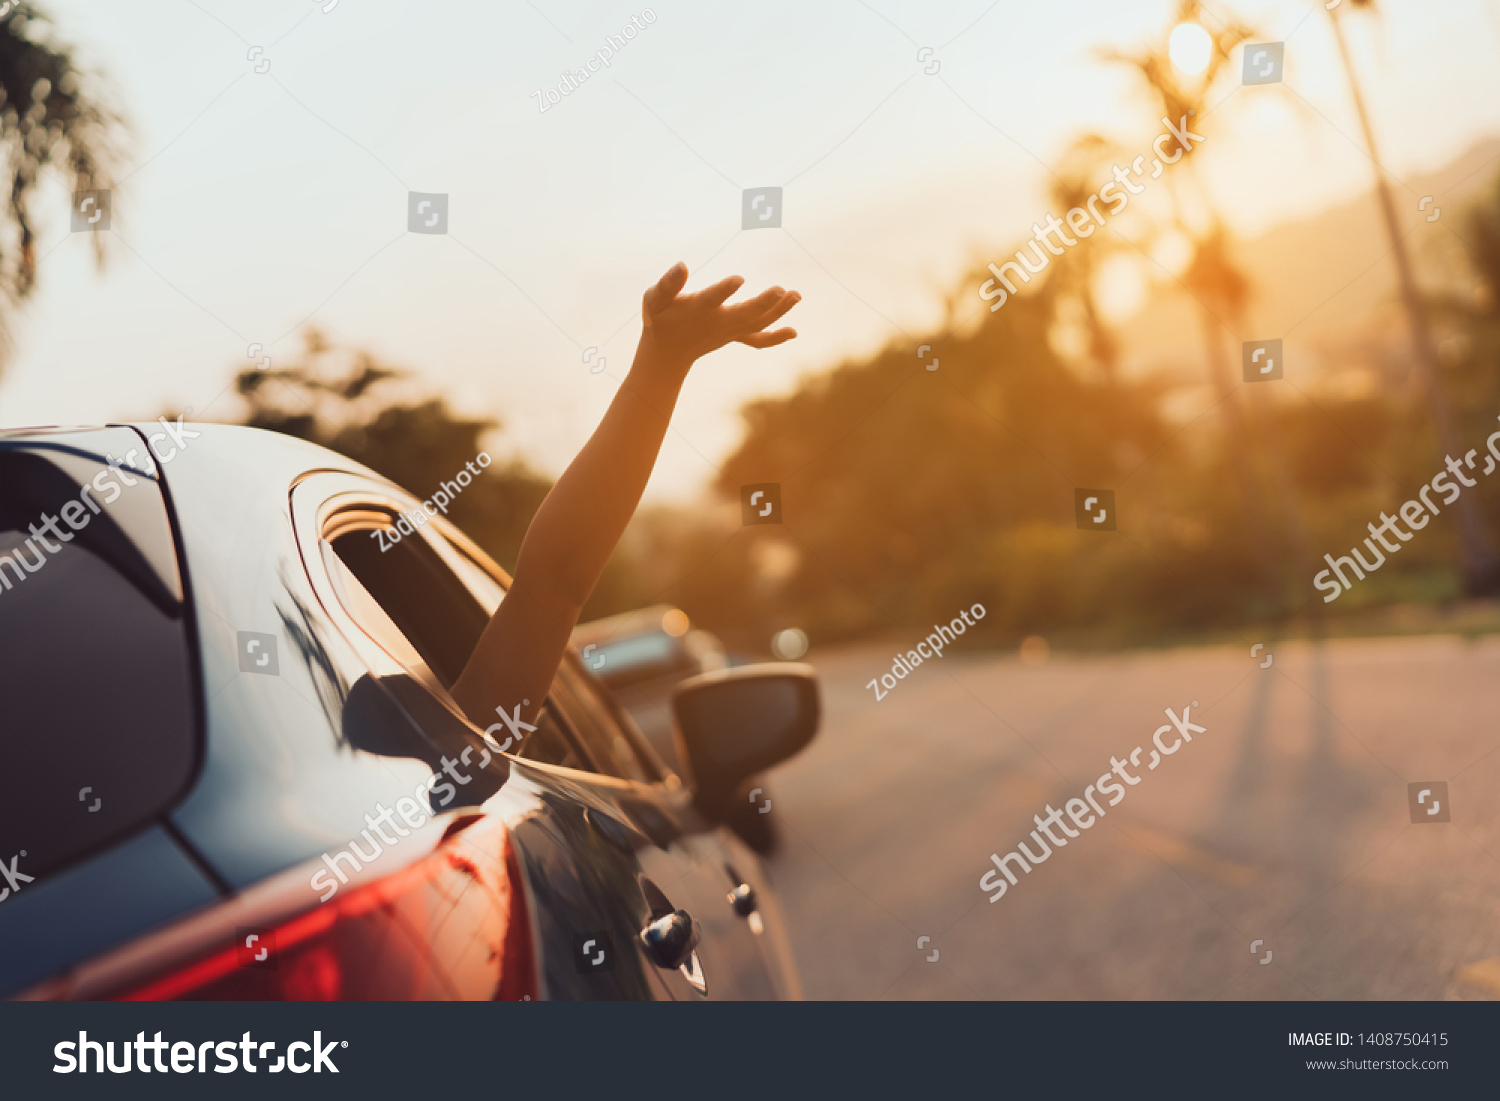 Hatchback Car travel driving road trip of woman summer vacation in blue car at sunset,Girls happy traveling enjoy holidays and relaxation with friends together get the atmosphere and go to destination #1408750415